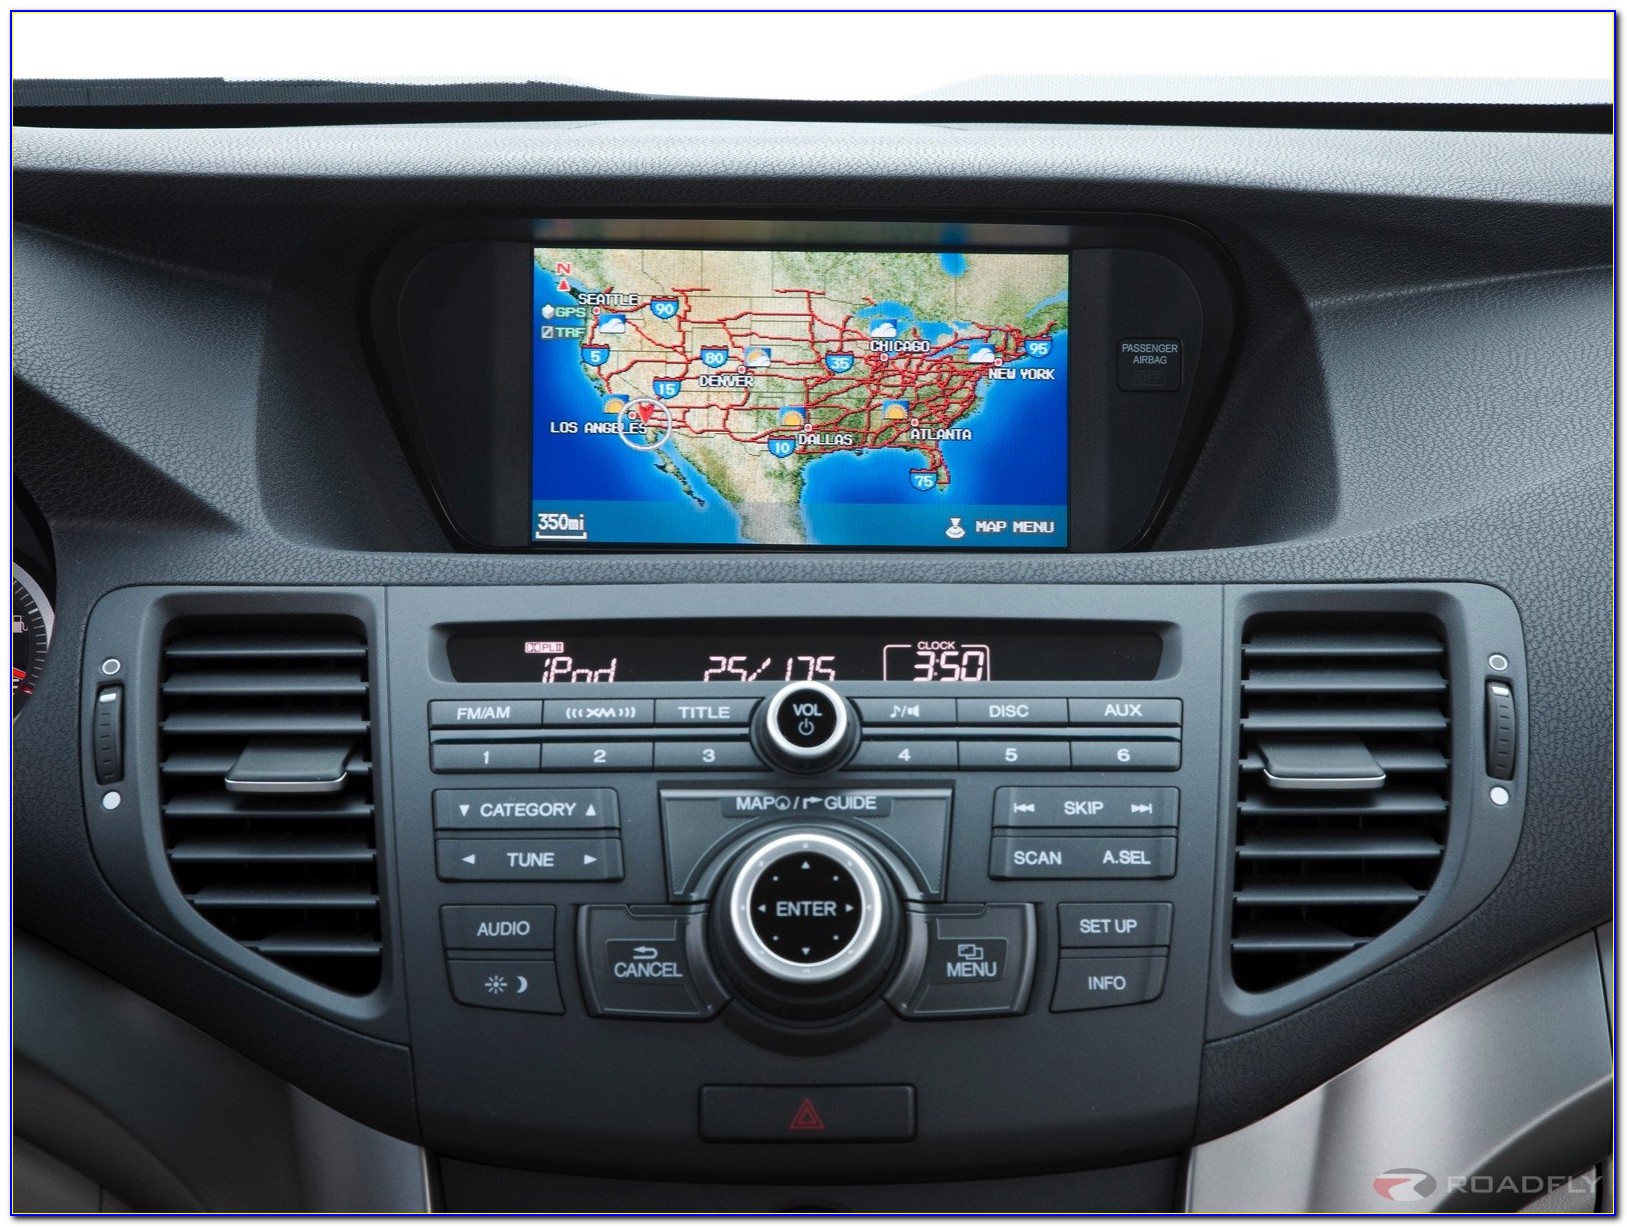 2012 Acura Navigation System Map Update